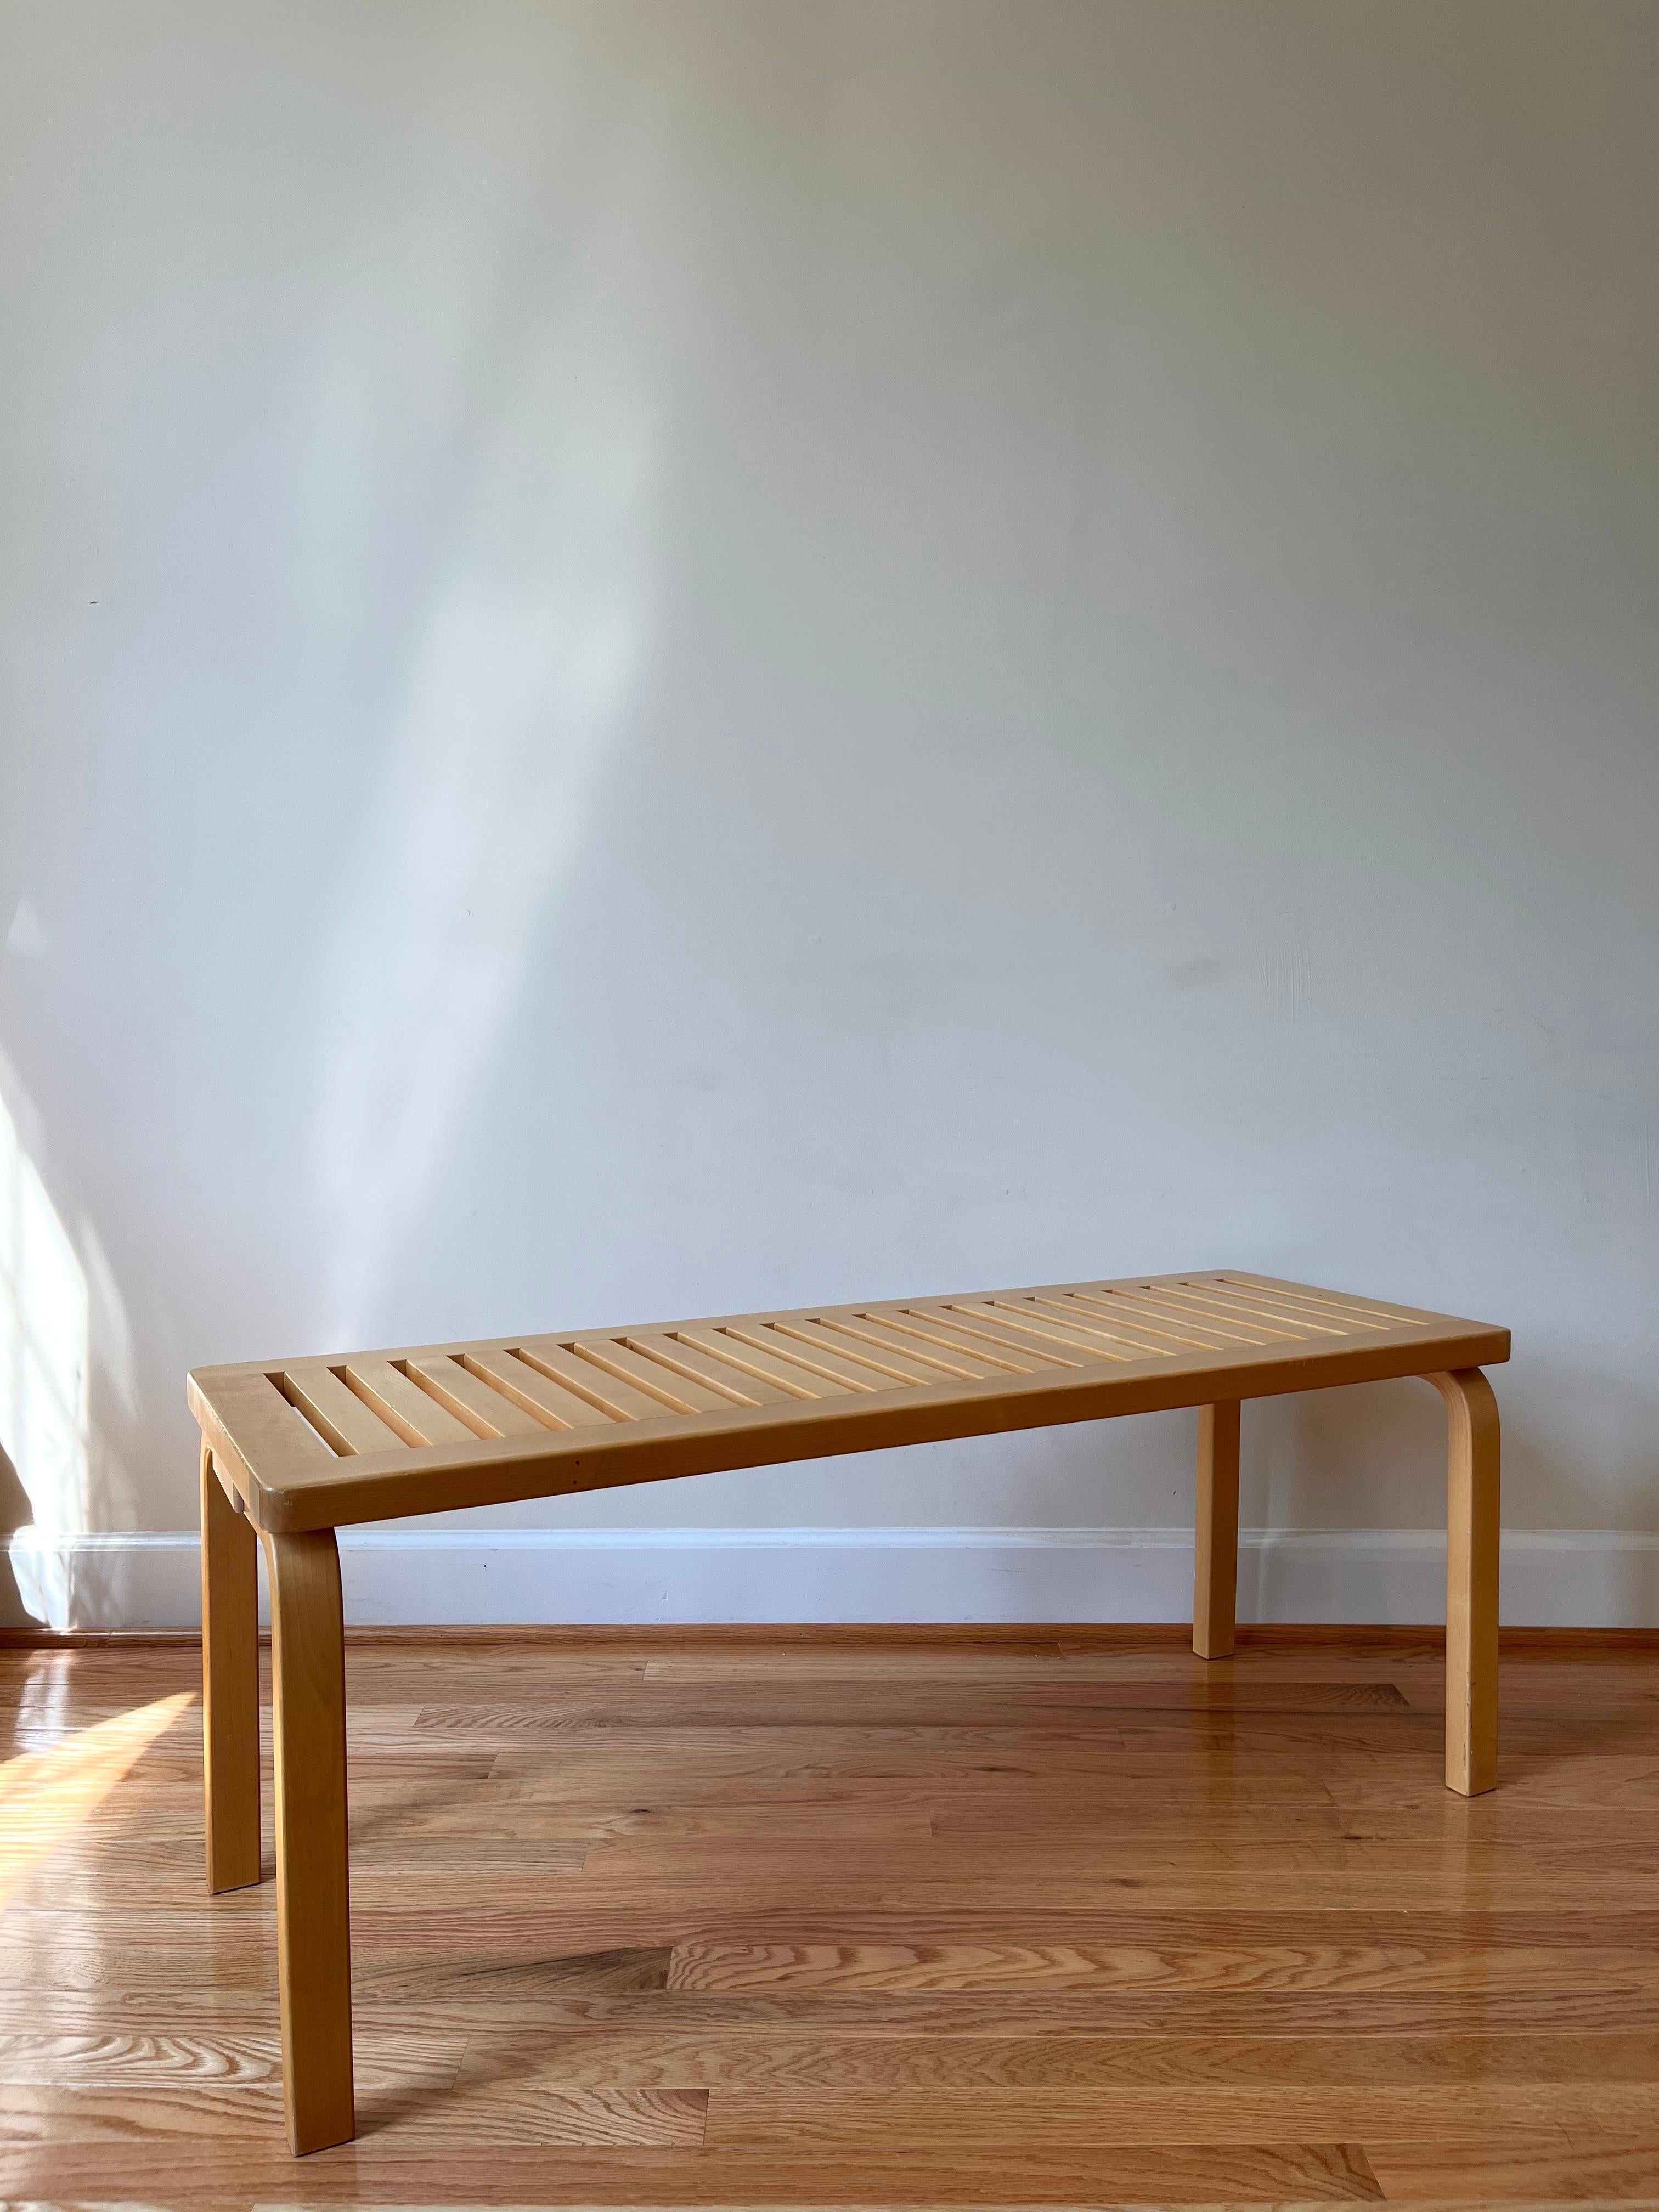 Bench 153 is lightweight, versatile, and equally at home in the public and private spheres. The seat is composed of solid birch wood and features vertical recesses that make the bench light and easy to move. 

Combining strength with the warm